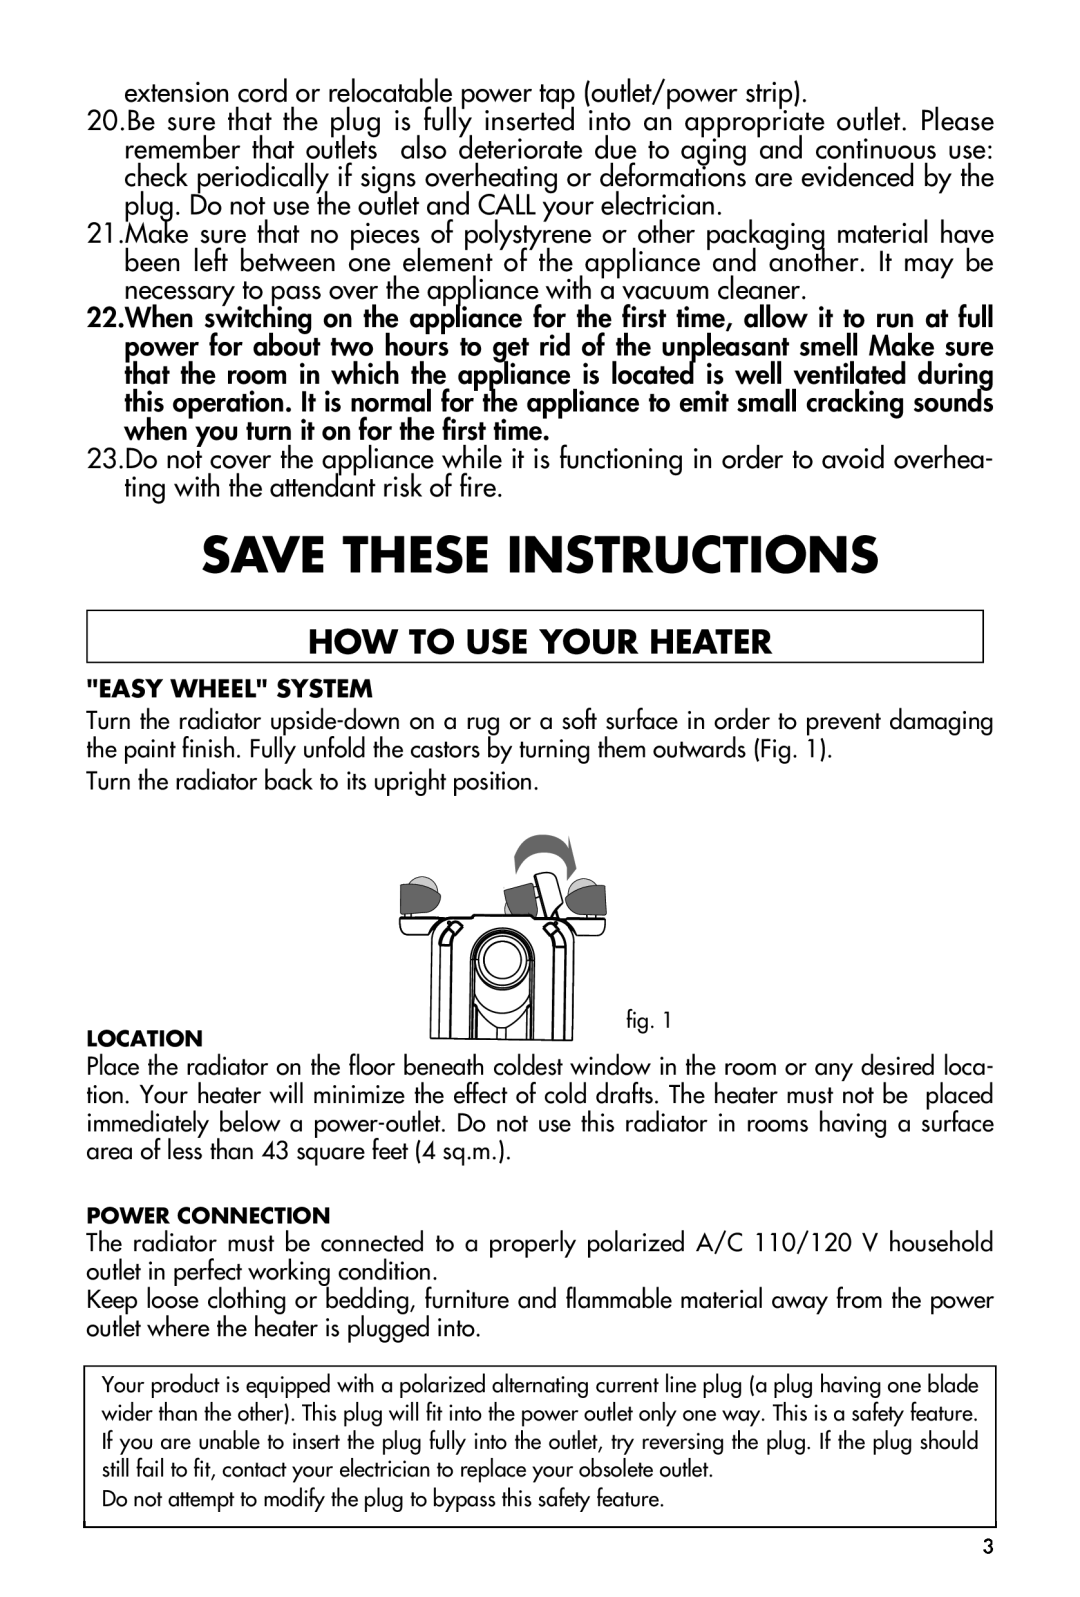 DeLonghi EW7507EBL manual Save These Instructions, How To Use Your Heater 